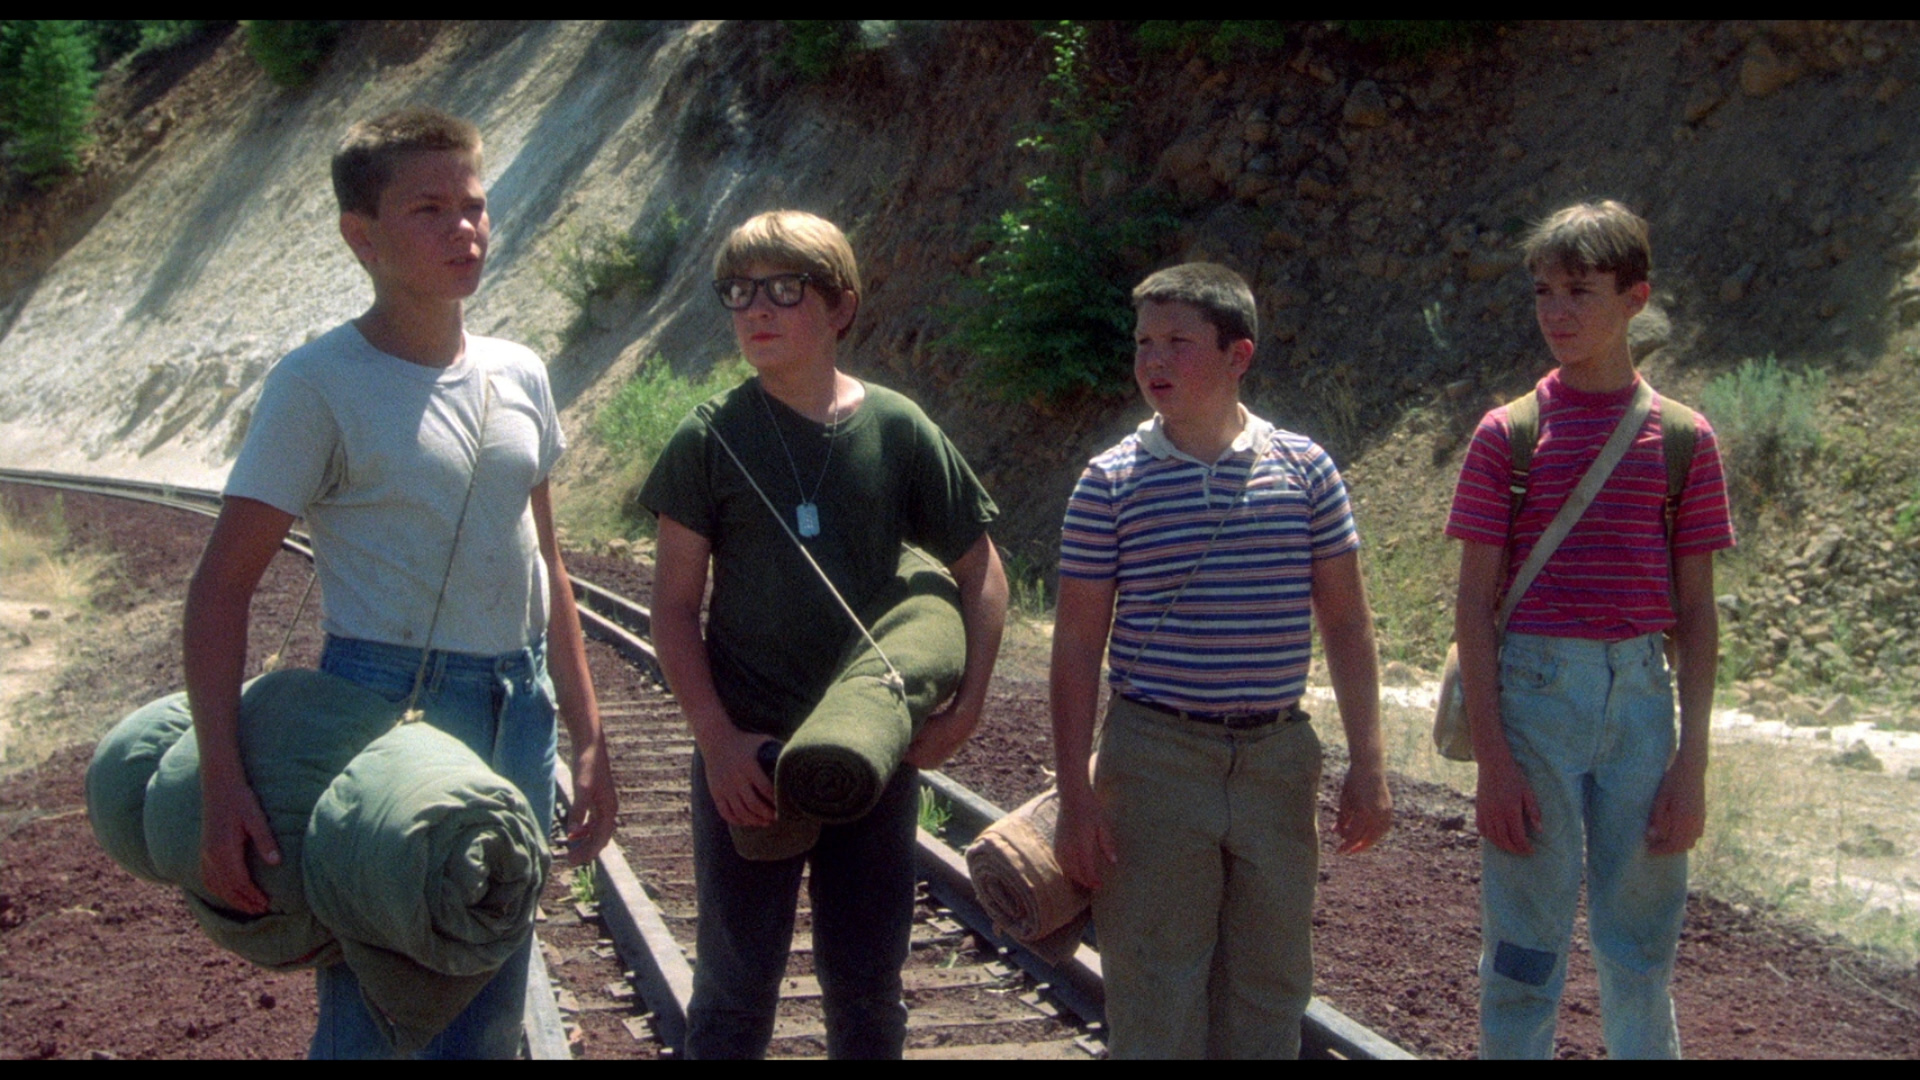 Stand by me movie review essay